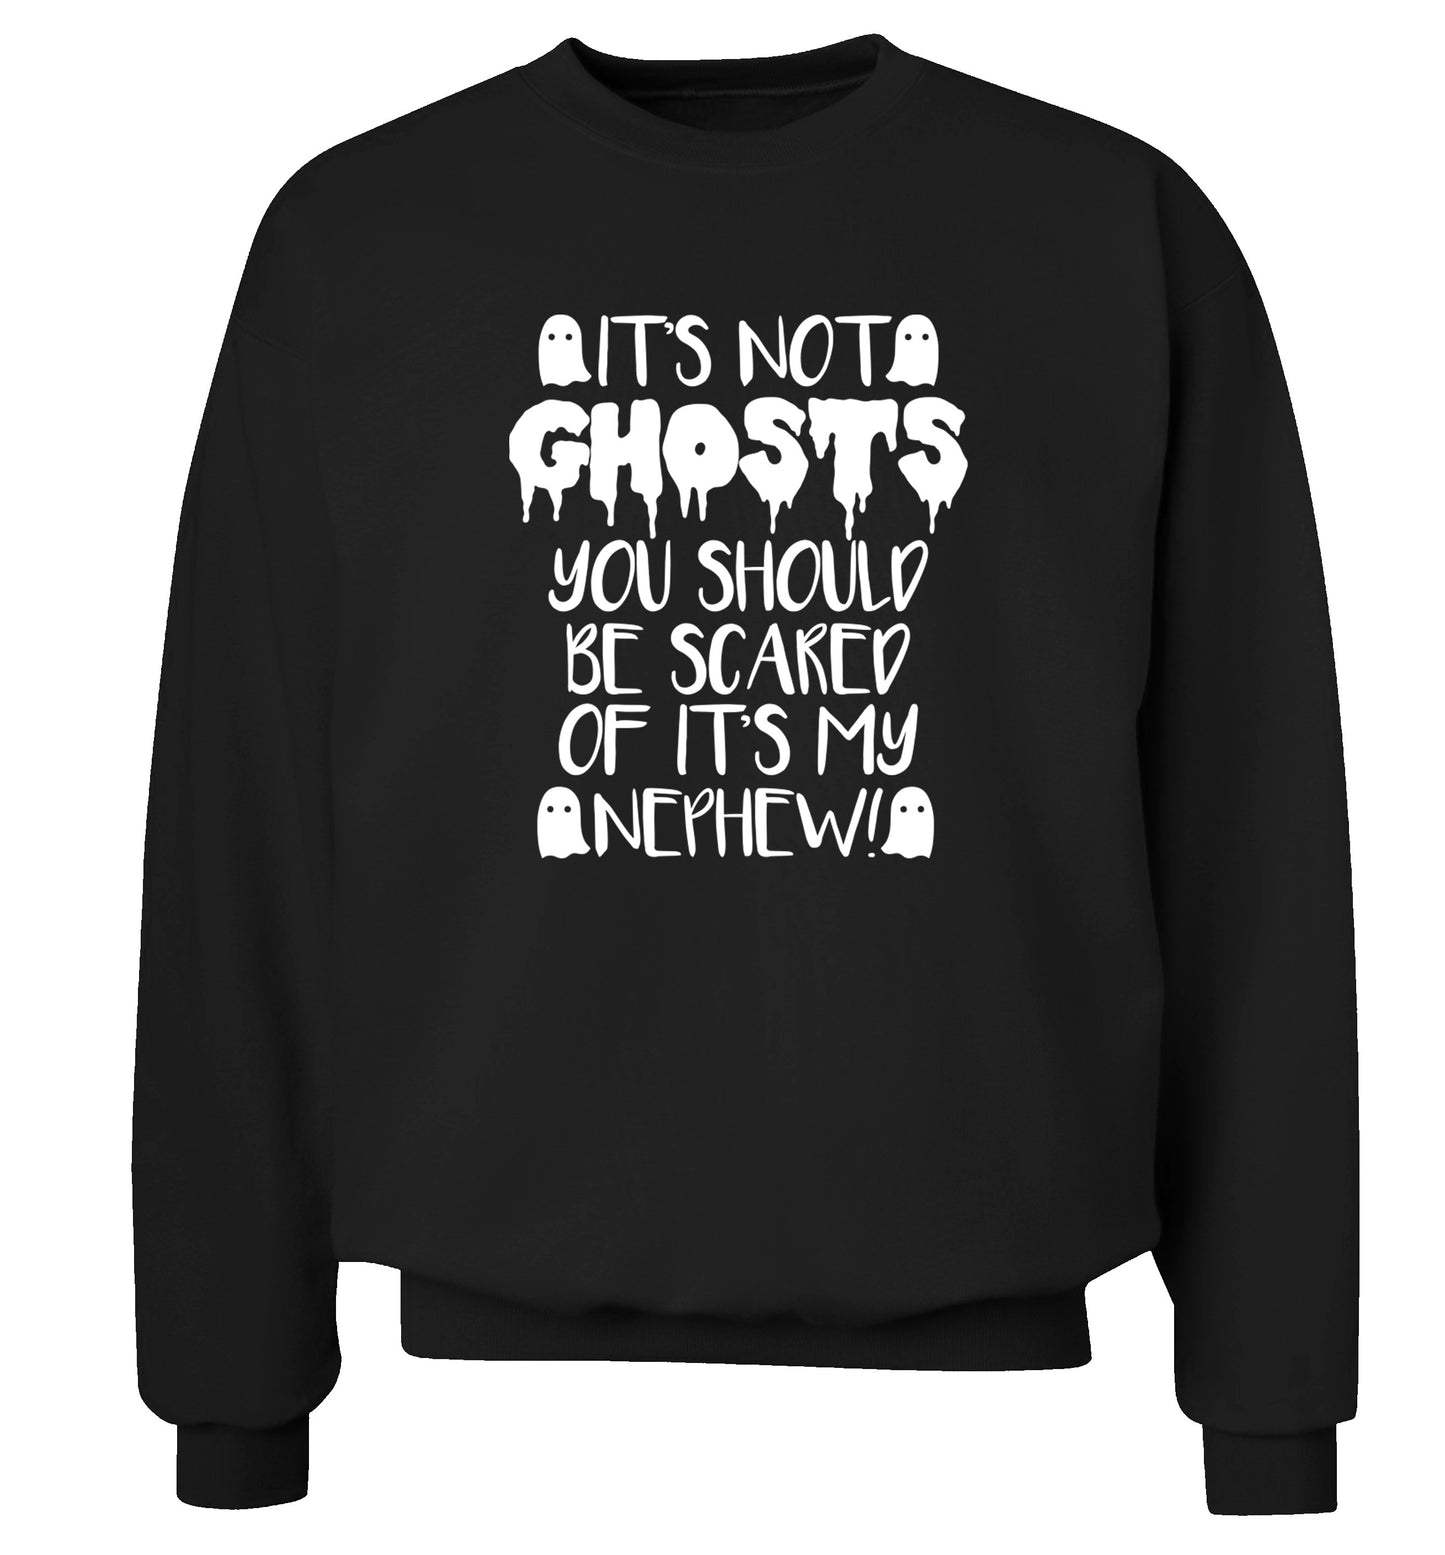 It's not ghosts you should be scared of it's my nephew! Adult's unisex black Sweater 2XL